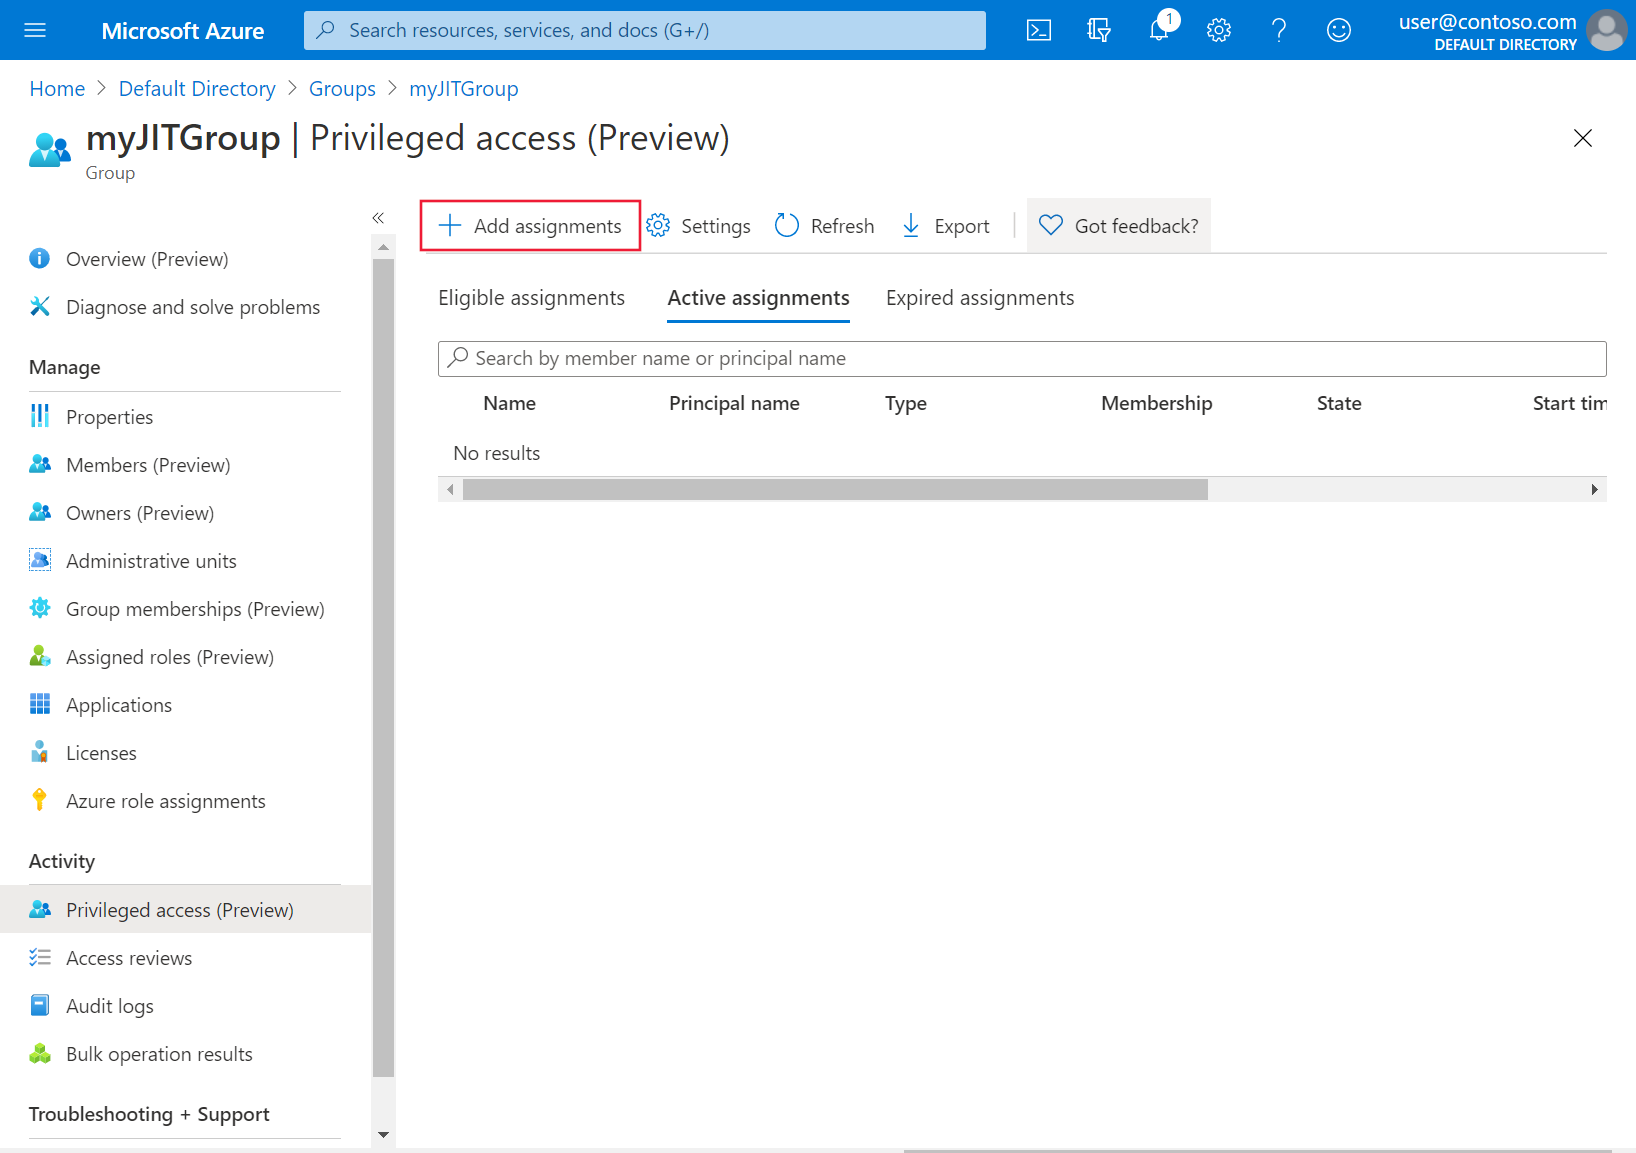 The Azure portal's Privileged access (Preview) screen after enabling is shown. The option to 'Add assignments' is highlighted.